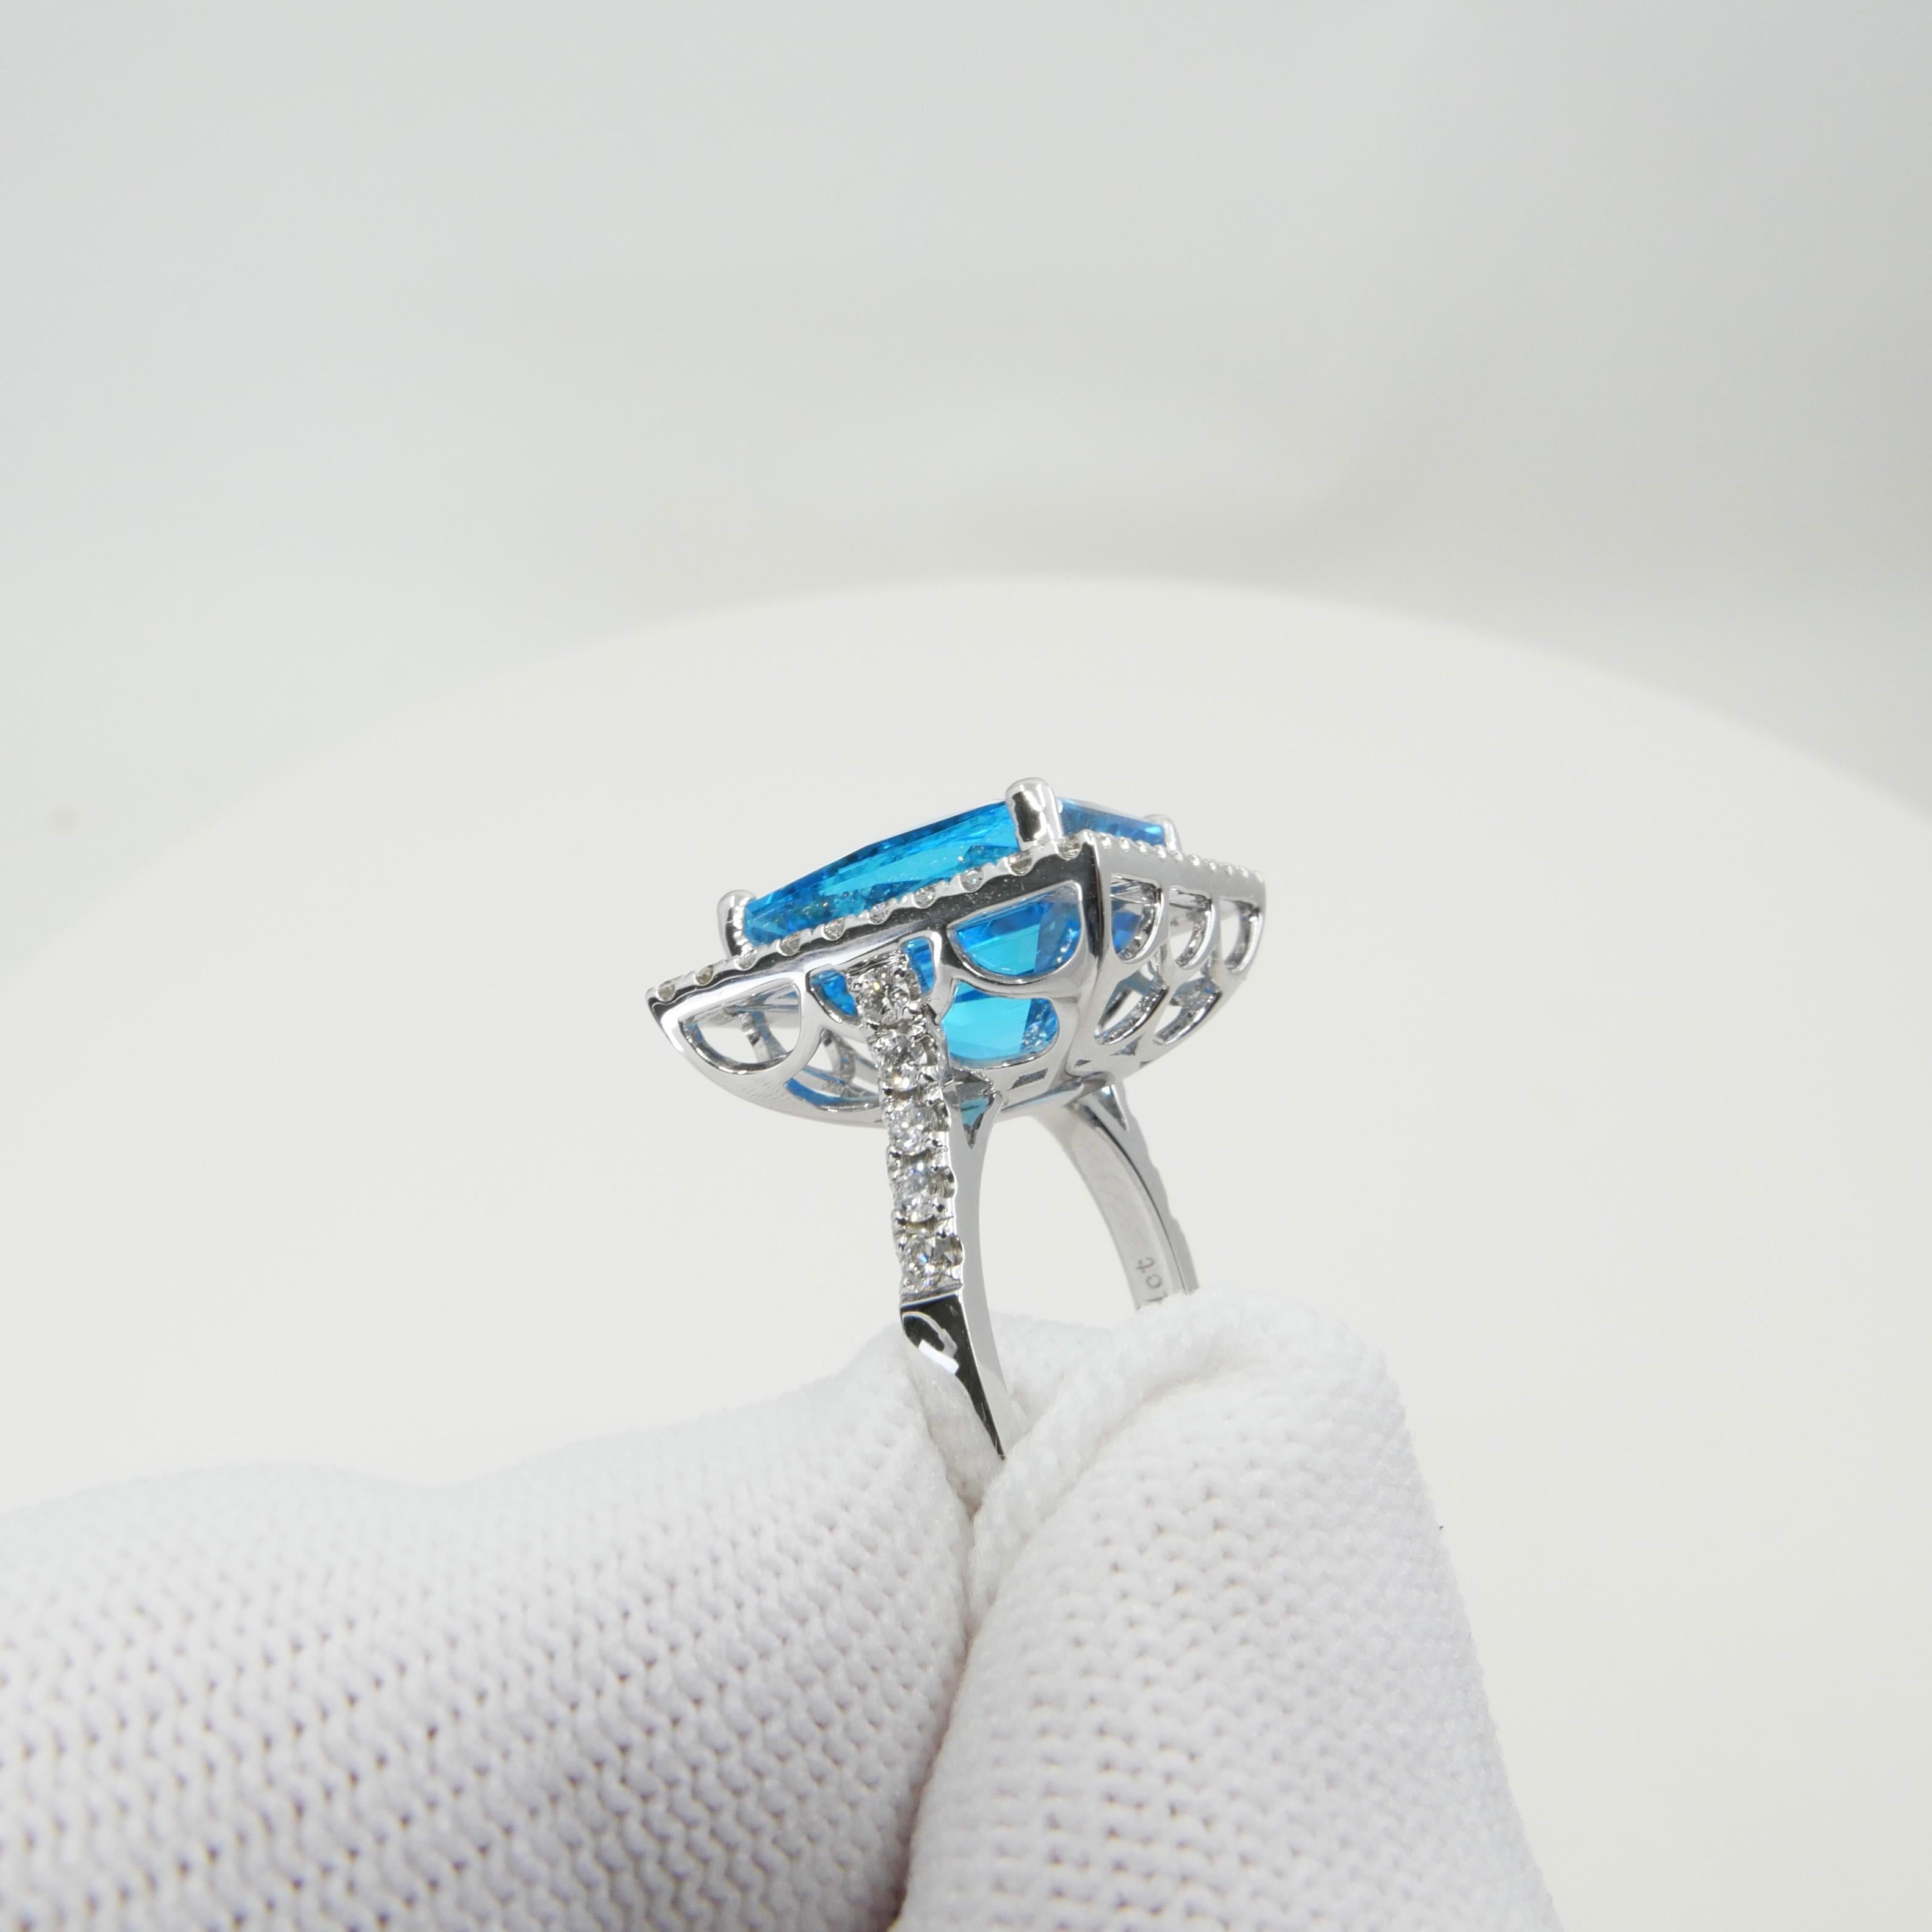  13 Cts checker Square Cut Blue Topaz & Diamond Cocktail Ring. Big Statement. For Sale 1